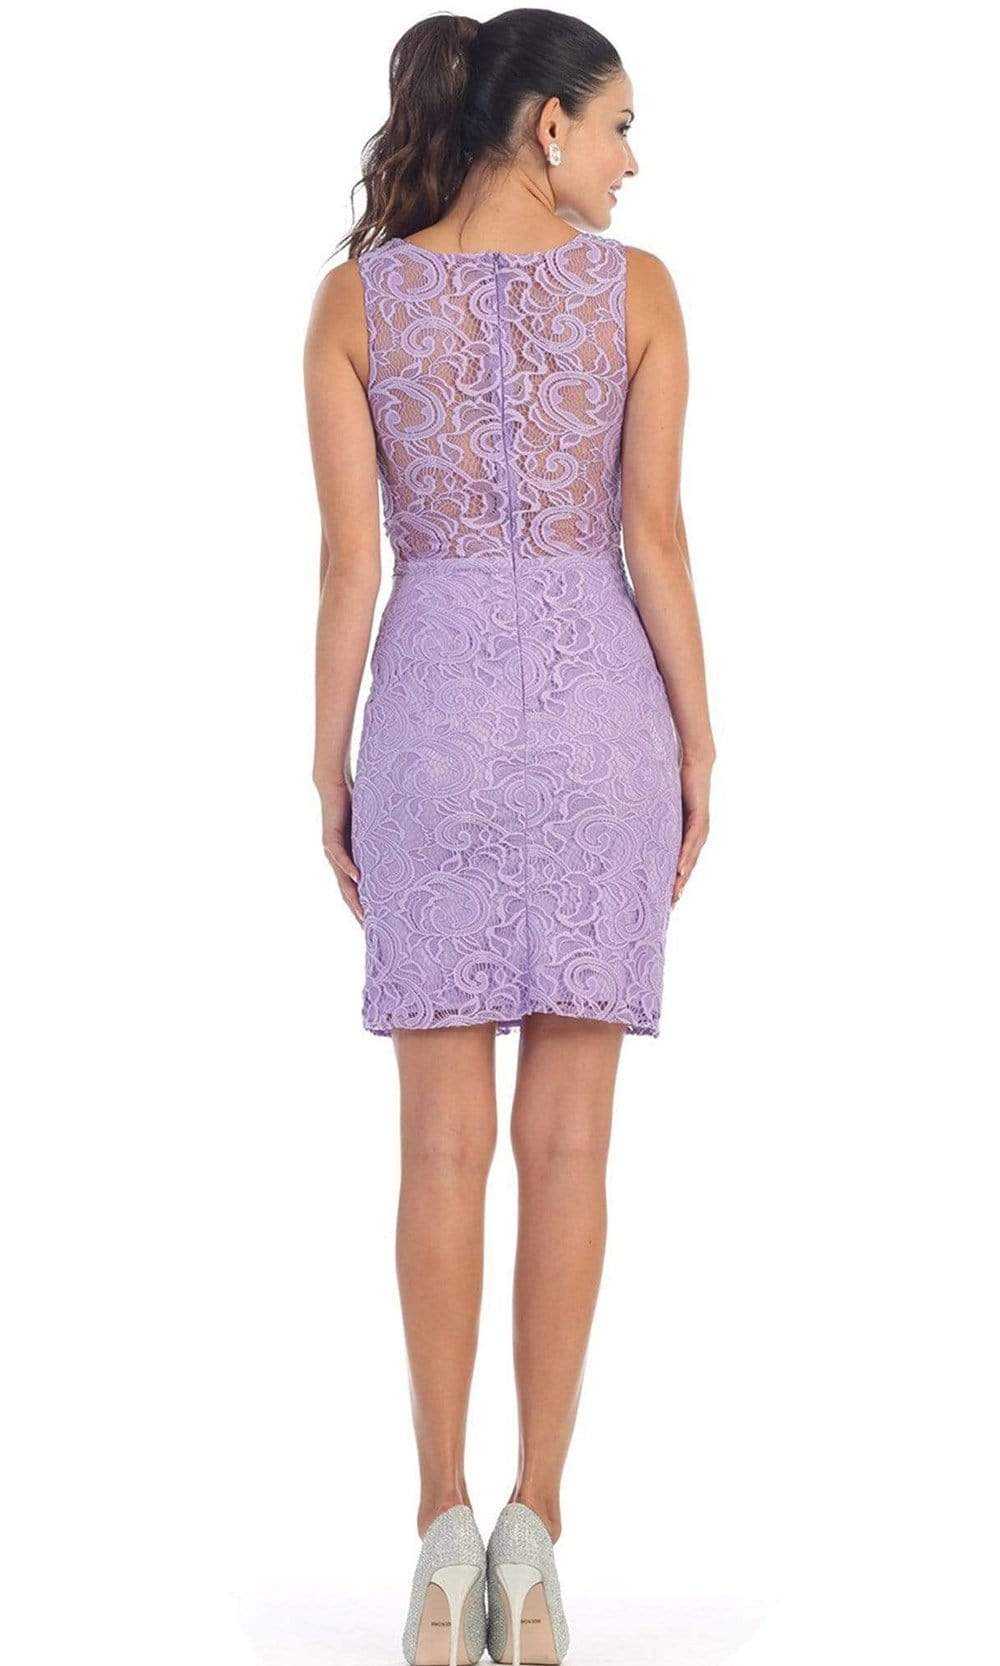 May Queen, May Queen - Two Piece Lace Sheath Dress MQ1267 - 1 pc Lilac In Size 8 Available